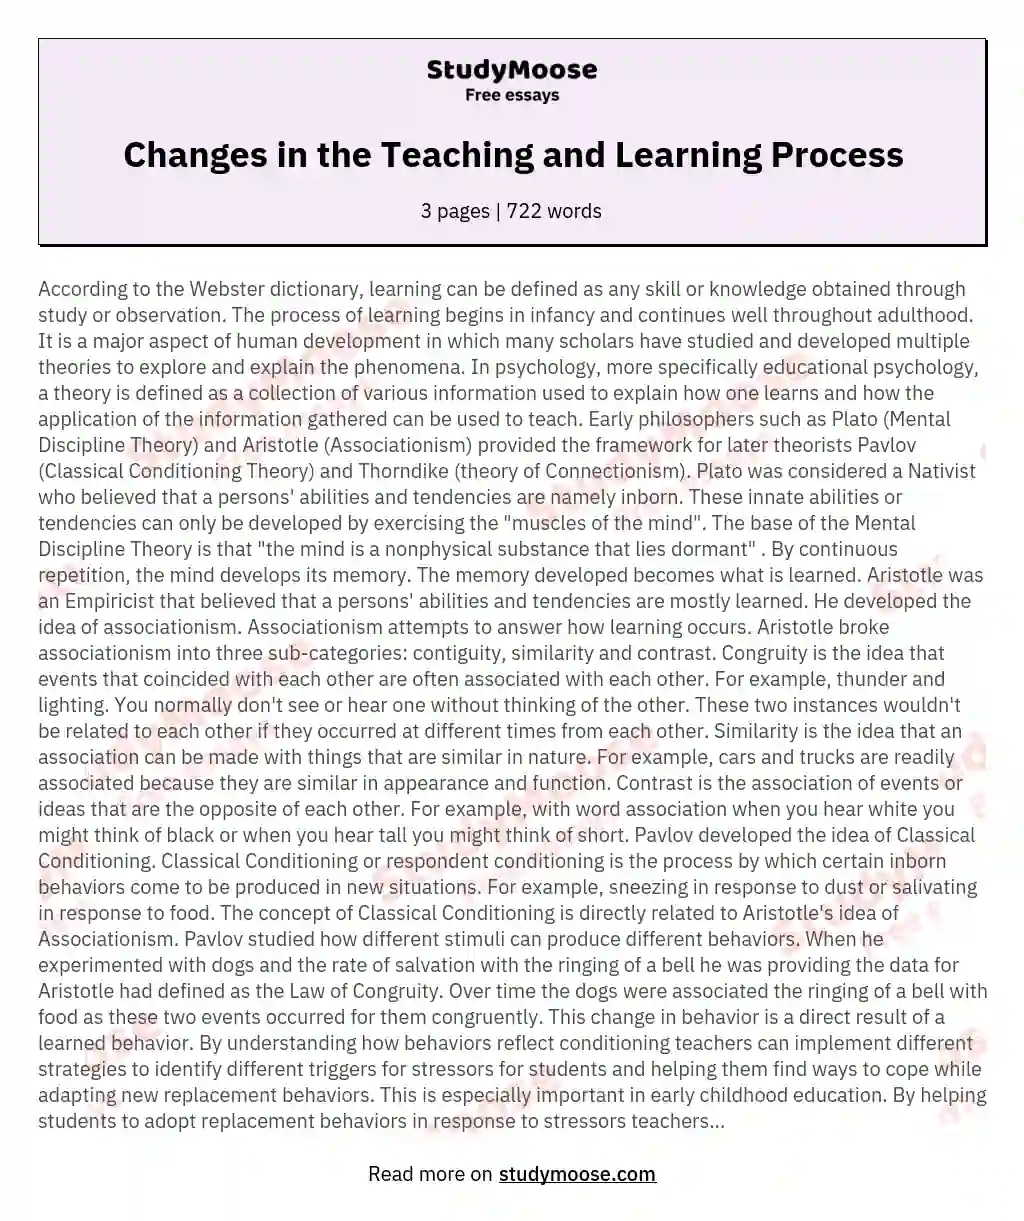 Changes in the Teaching and Learning Process essay